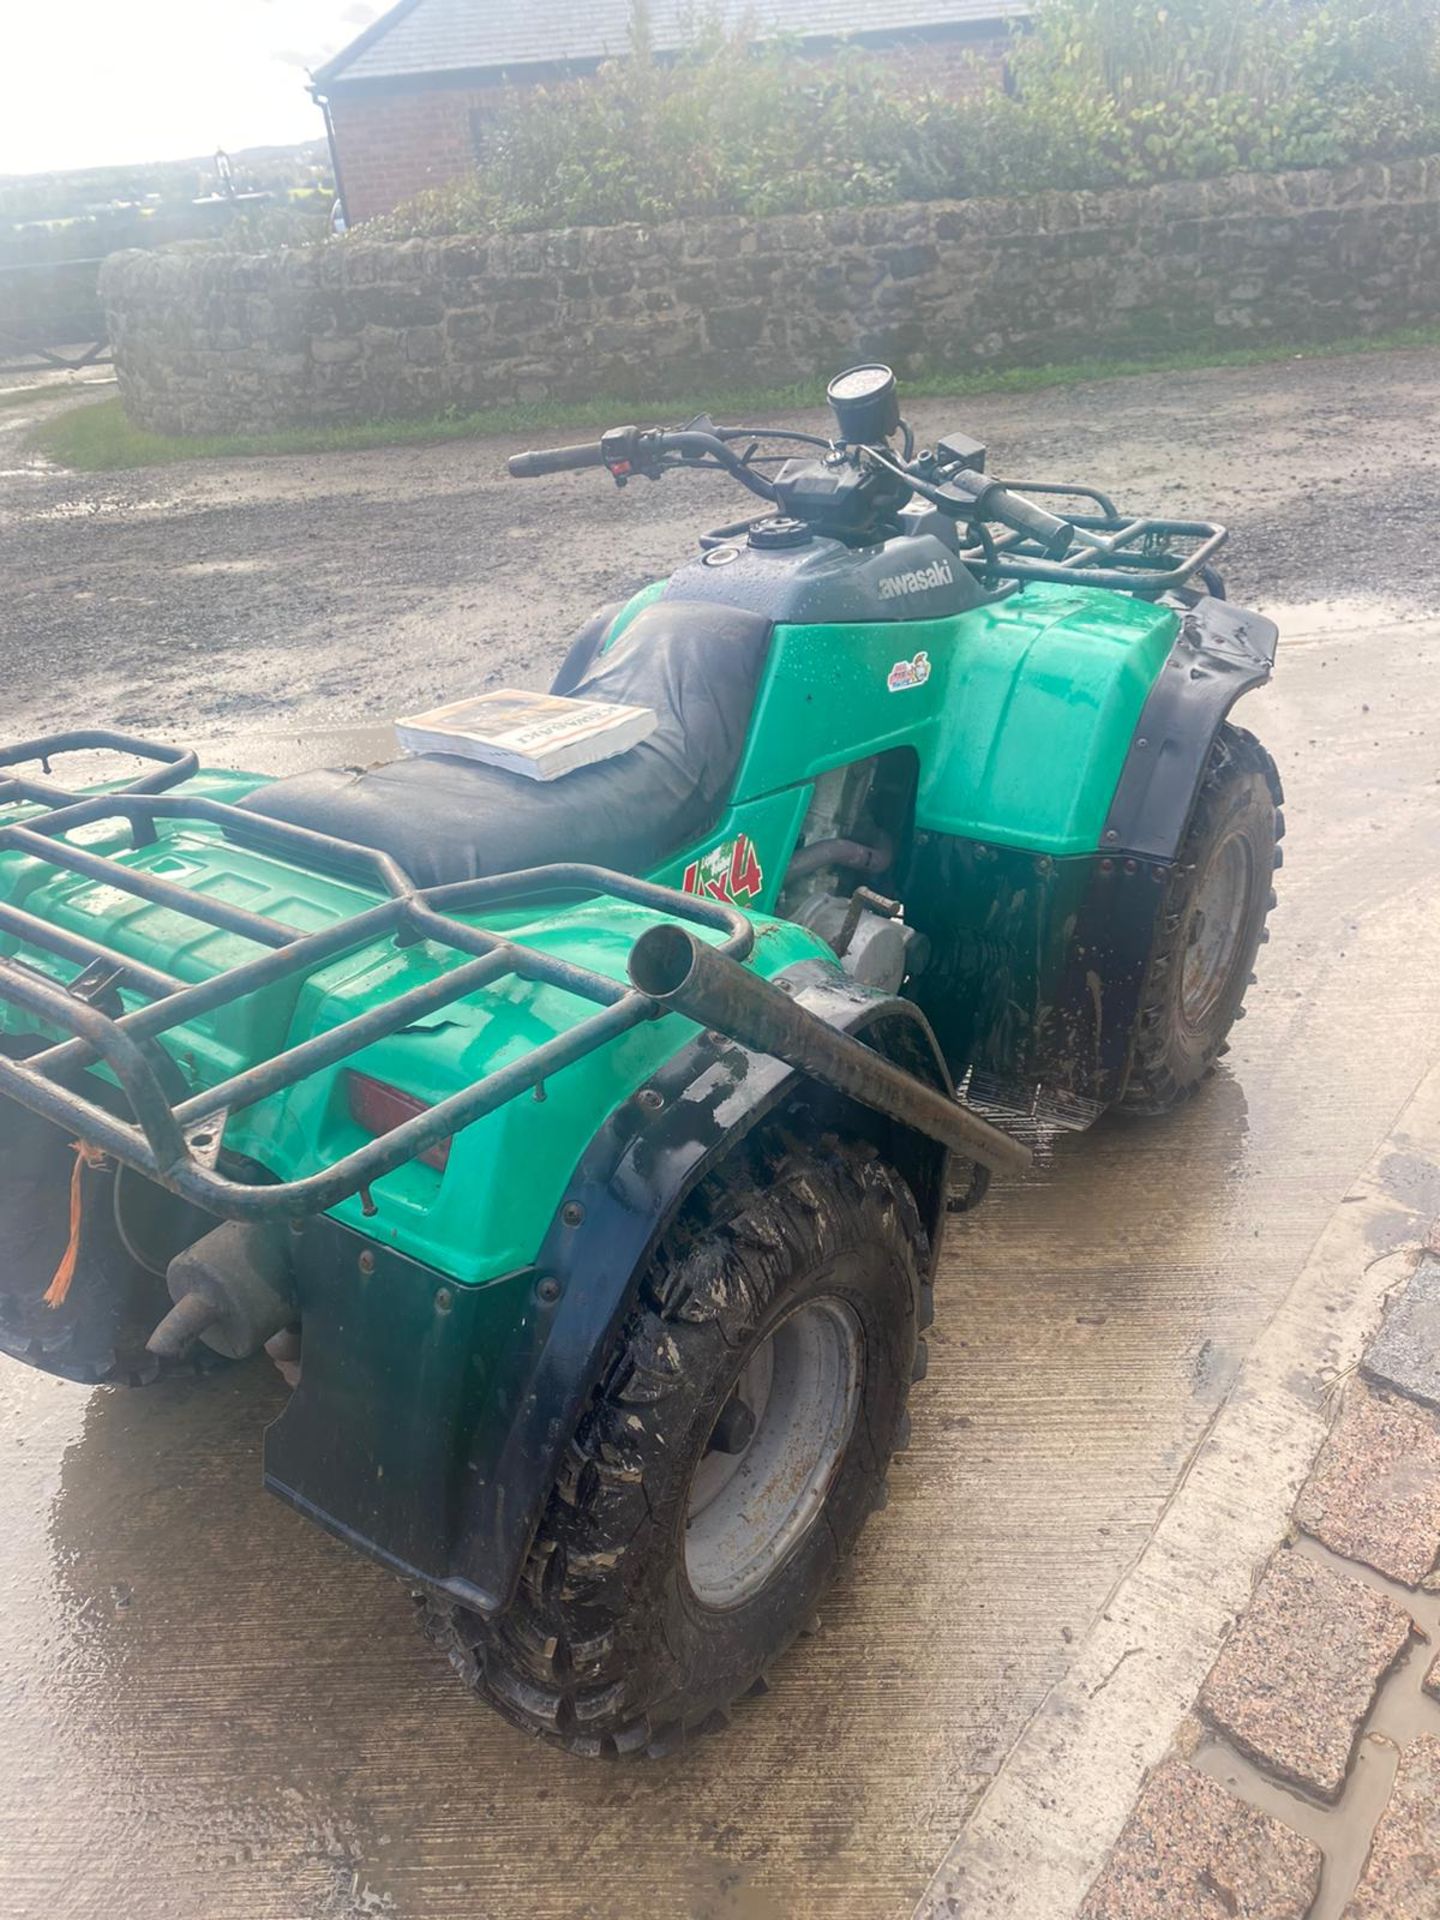 KAWASAKI KLF400 FARM QUAD, RUNS AND WORKS WELL, IN GOOD CONDITION *NO VAT* - Image 6 of 6